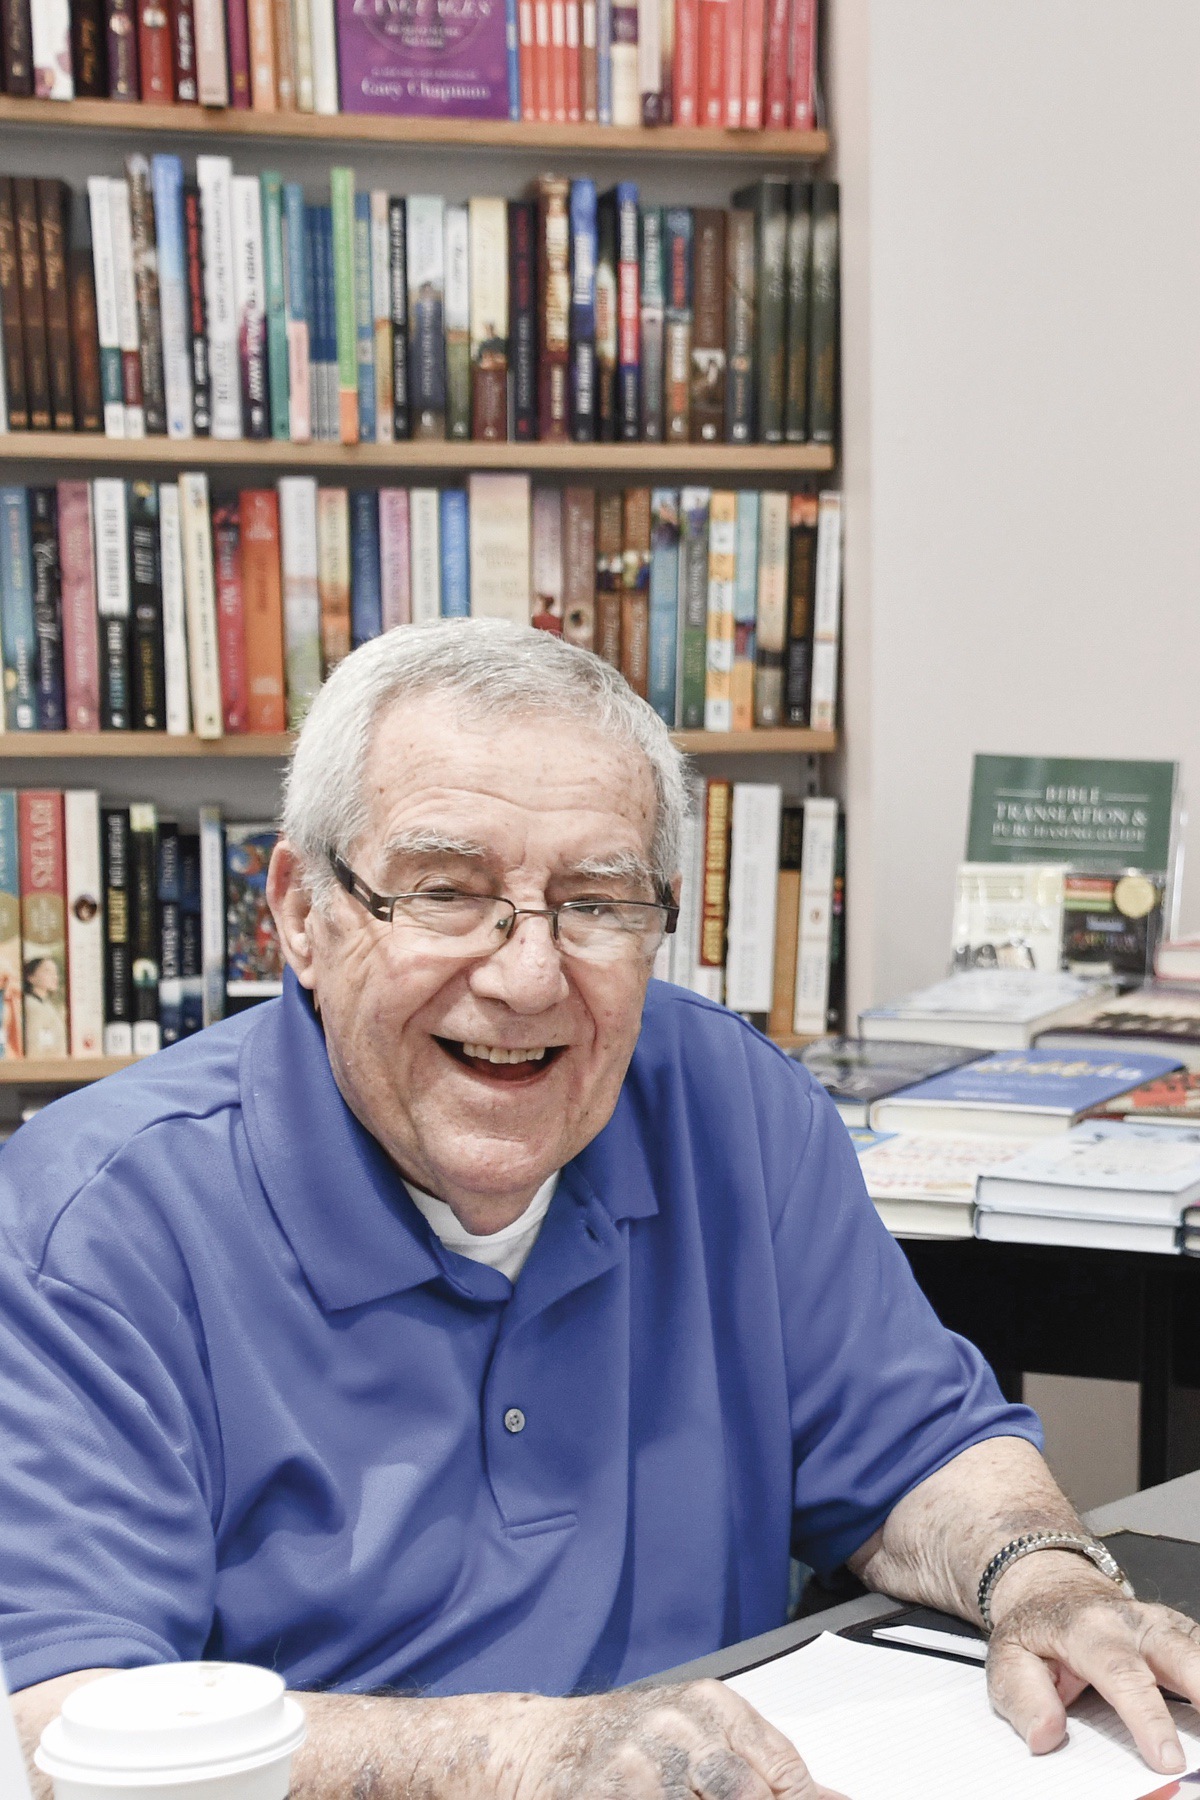 Author and Sun City resident Frank Ardito hopes to reach audiences through his book and presentations. (Photo by Christine Such/My Sun Day News)